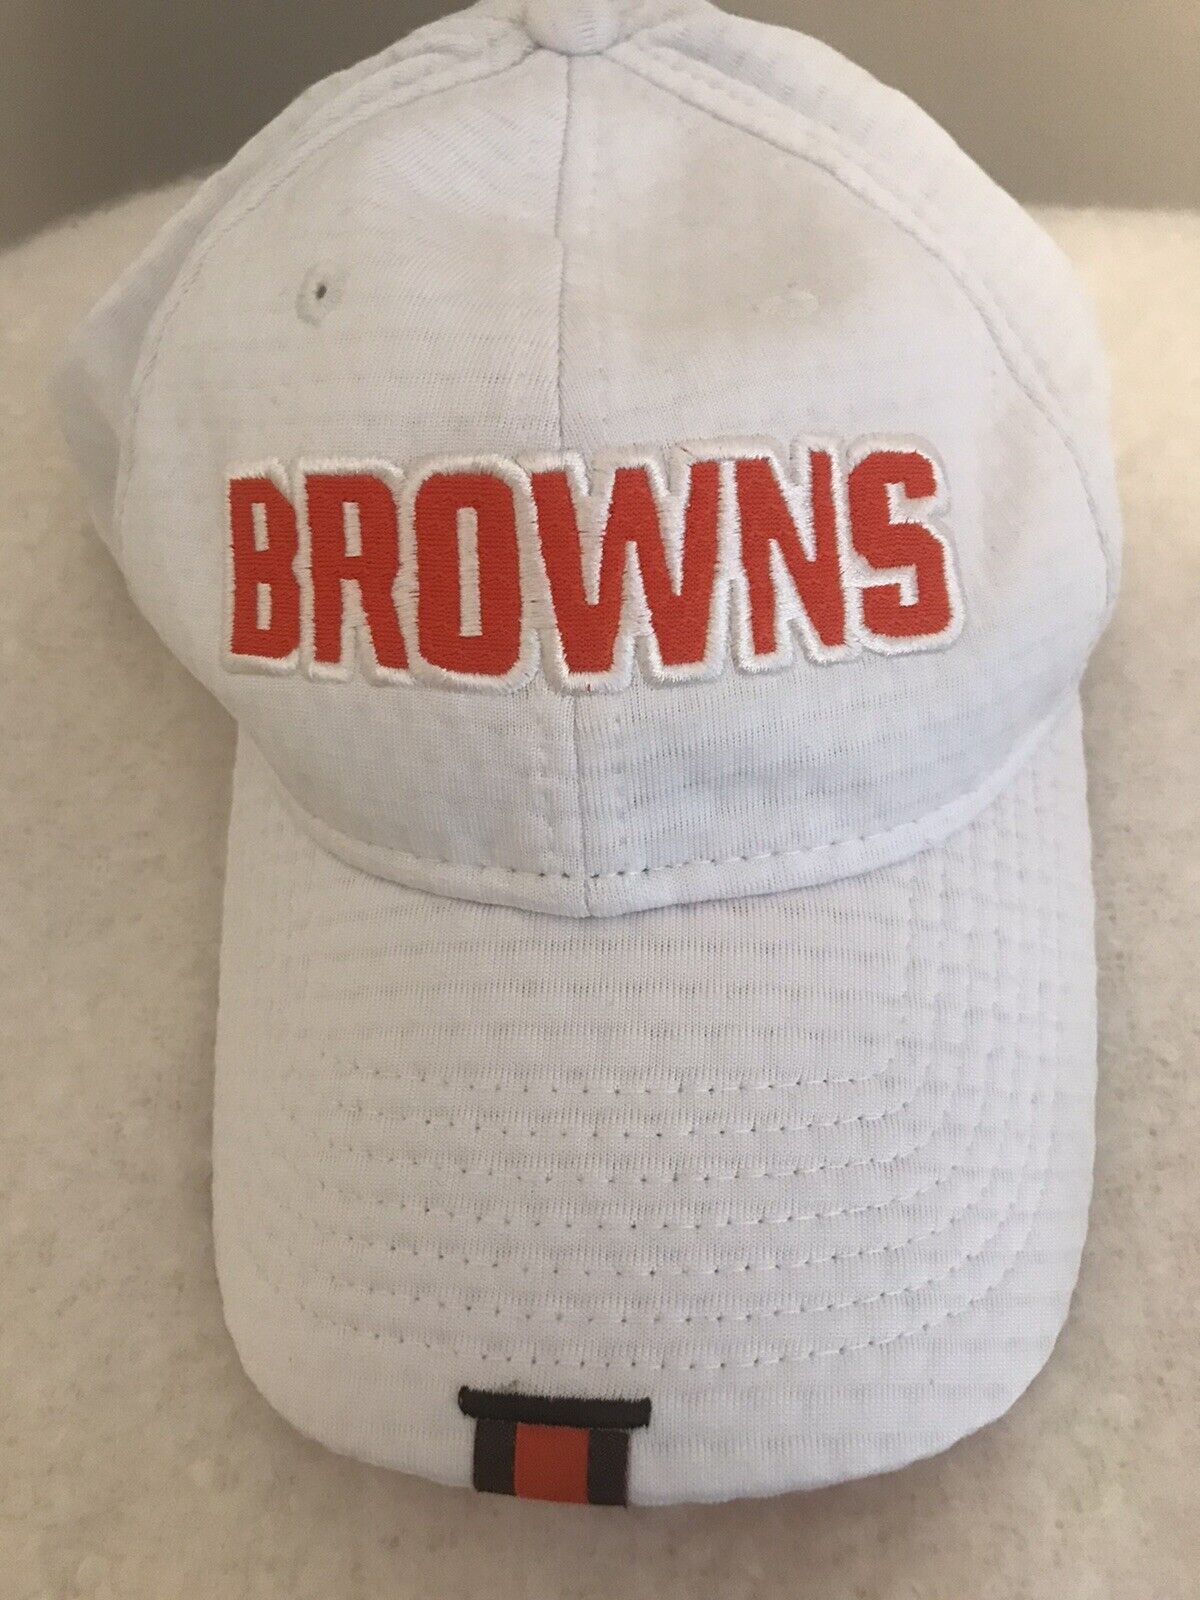 white cleveland browns hat